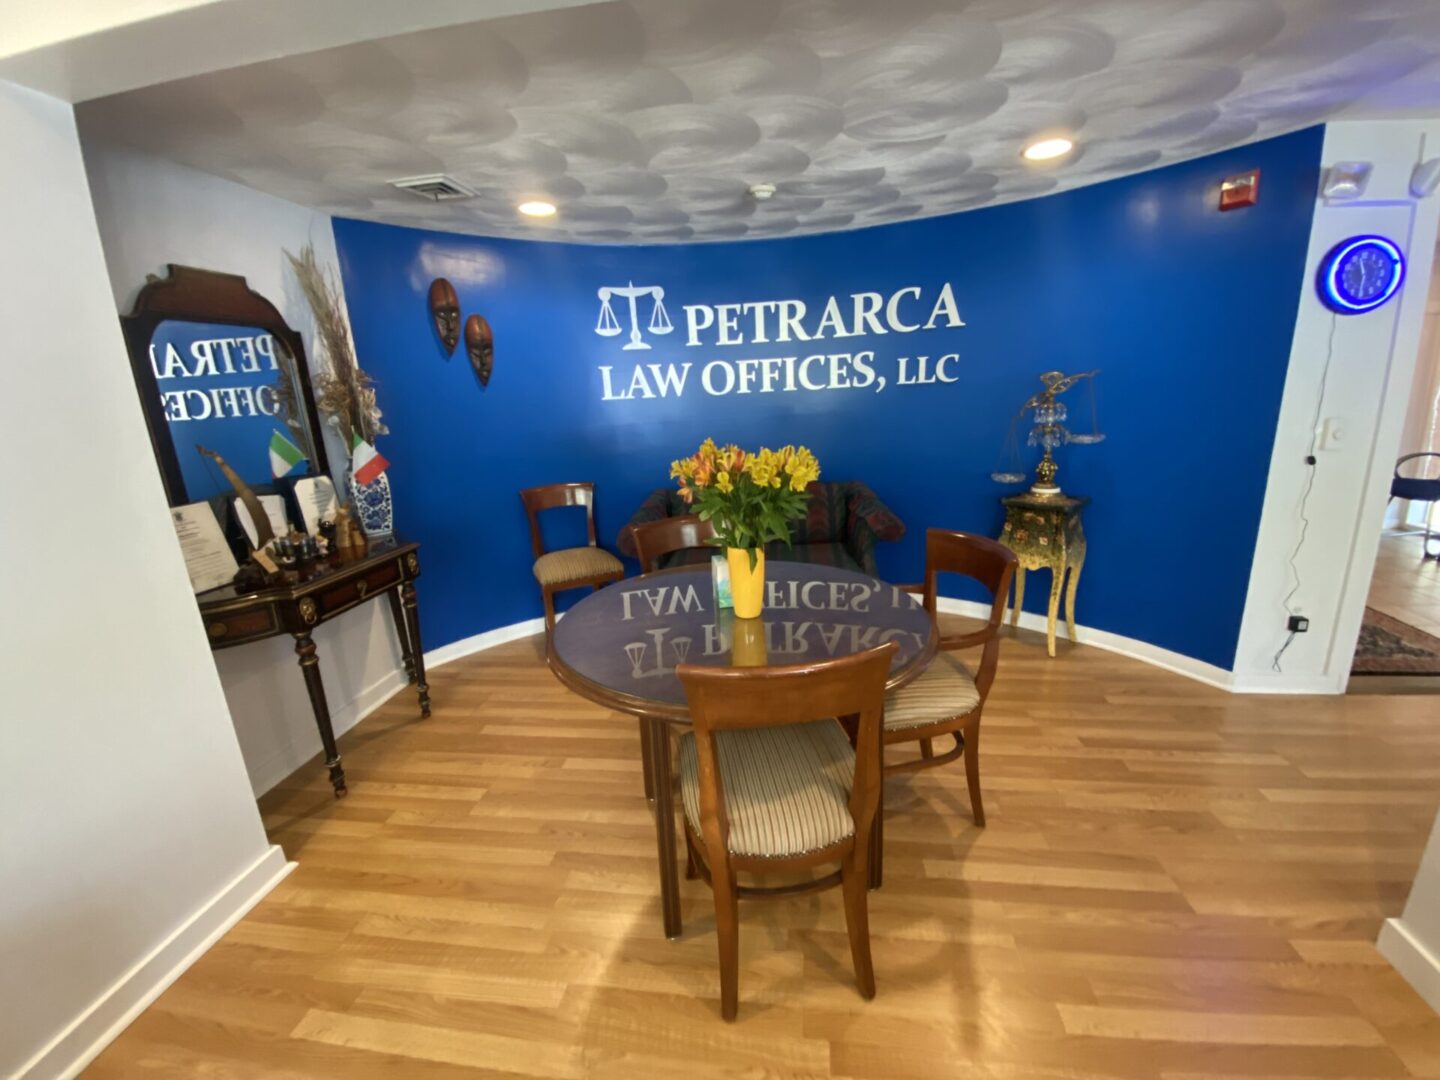 A table with flowers in front of the words petracca law offices, llc.